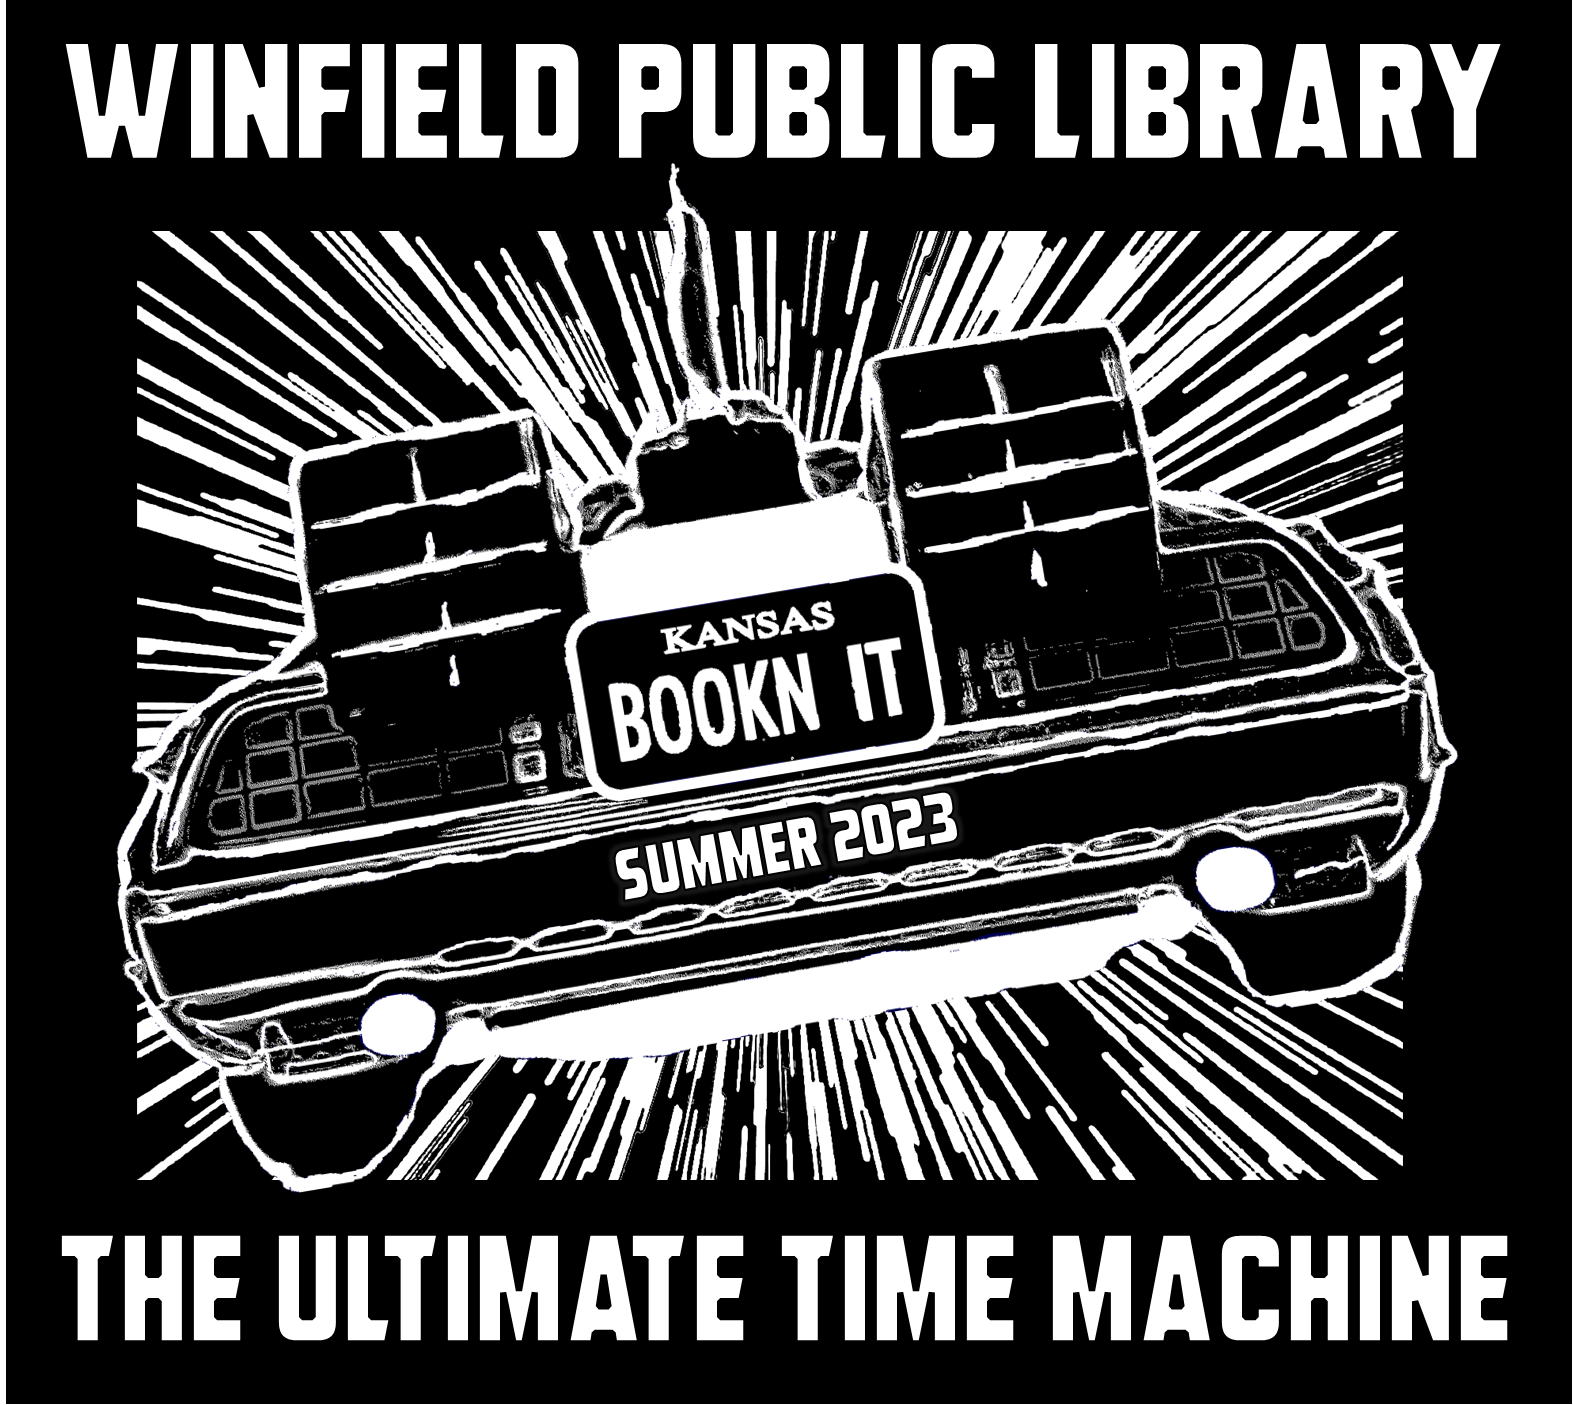 WPL the Ultimate Time Machine image